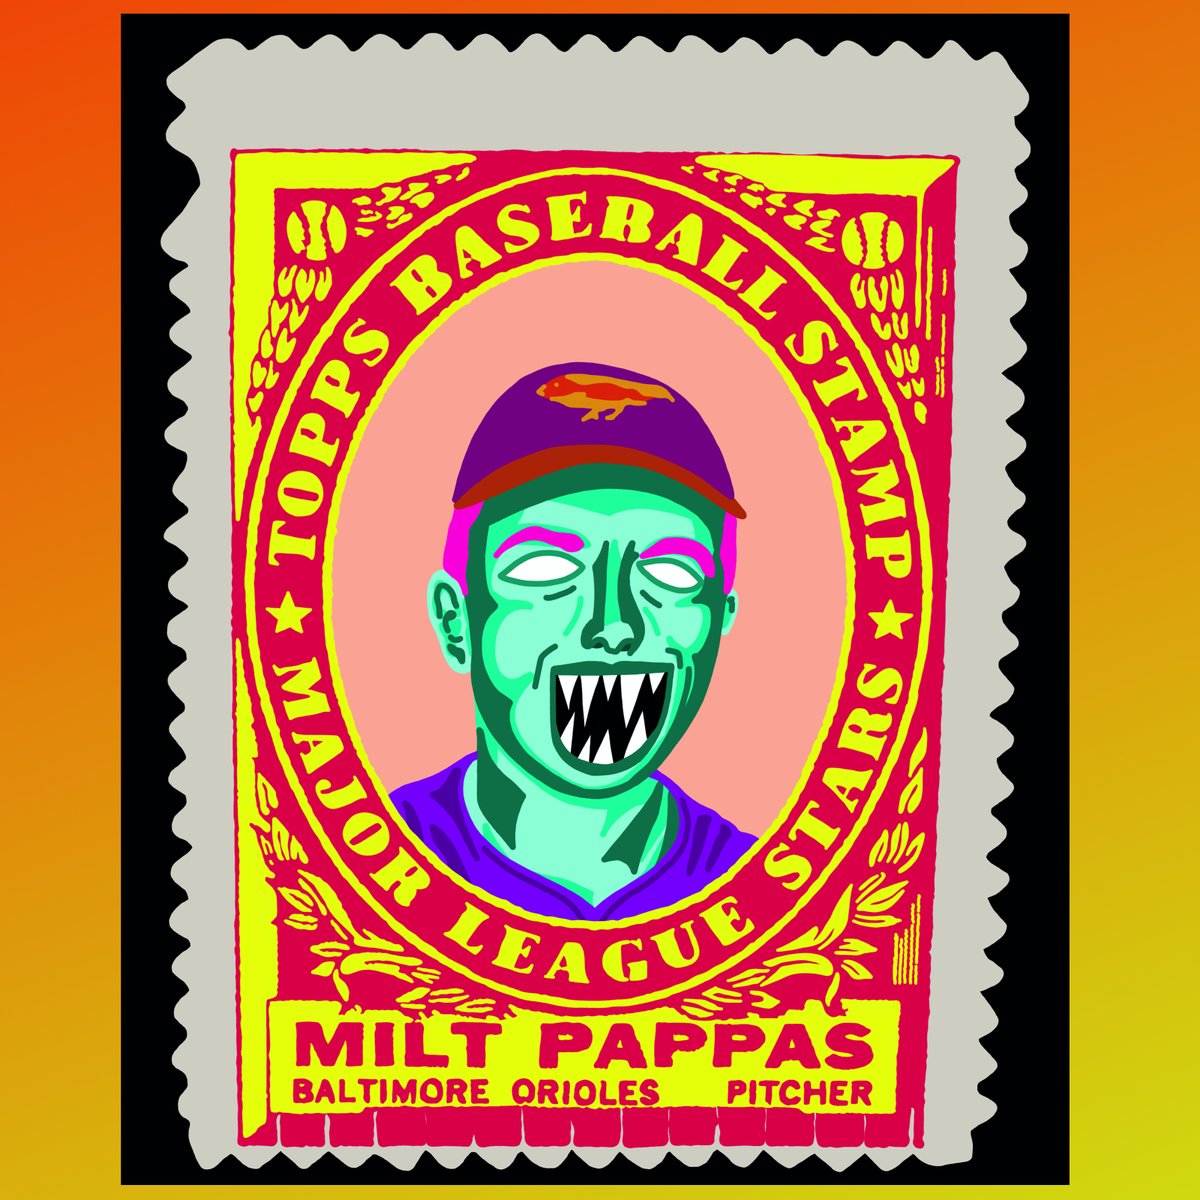 Let's kick off your week with a #NeonTerror of #MiltPappas and his 1961 #Topps stamp. #Gimpy pitched for #Orioles, #Reds, #Braves and #Cubs. Pappas was a 3x #AllStar, pitched a no-hitter on September 2, 1972 and was inducted into the #BaltimoreOrioles #HallofFame in '85. #CardArt